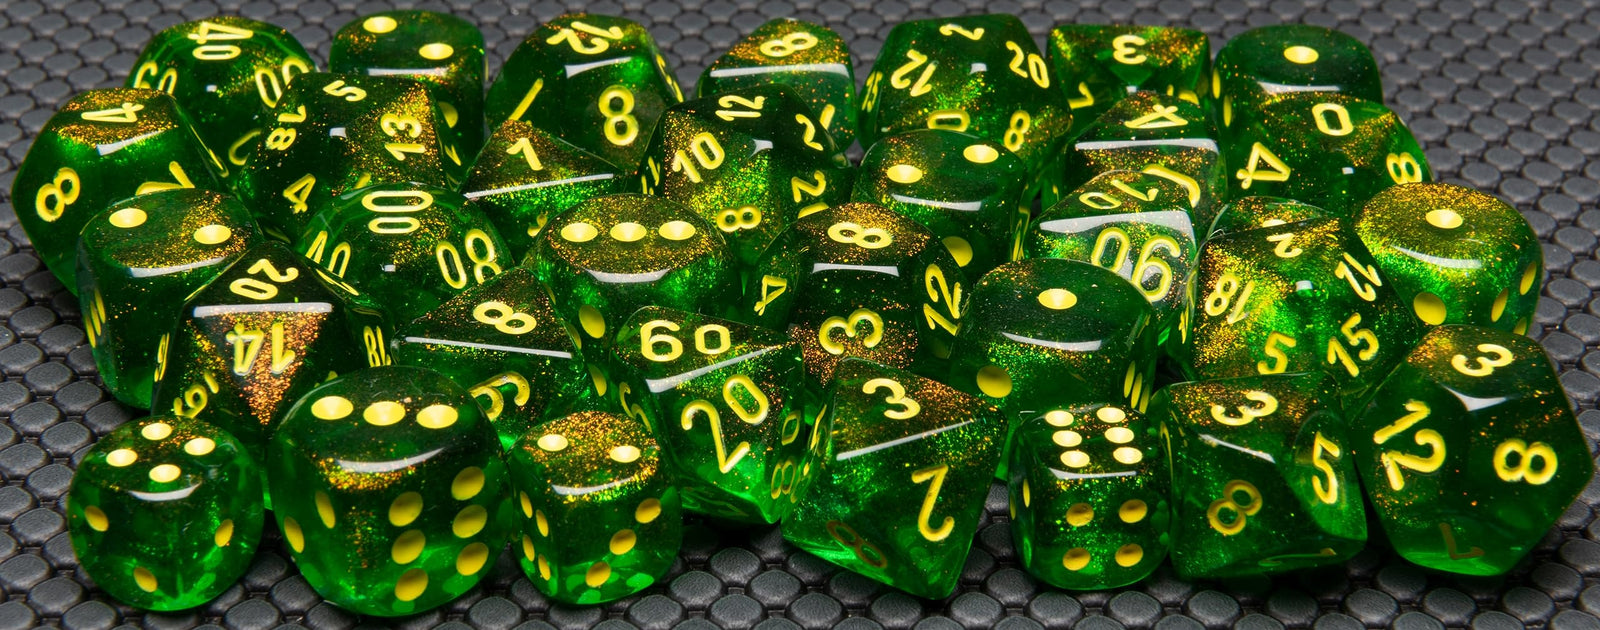 Chessex Manufacturing Accessories Dice Menagerie10: Poly Borealis D10 Maple Green/Yellow (10)